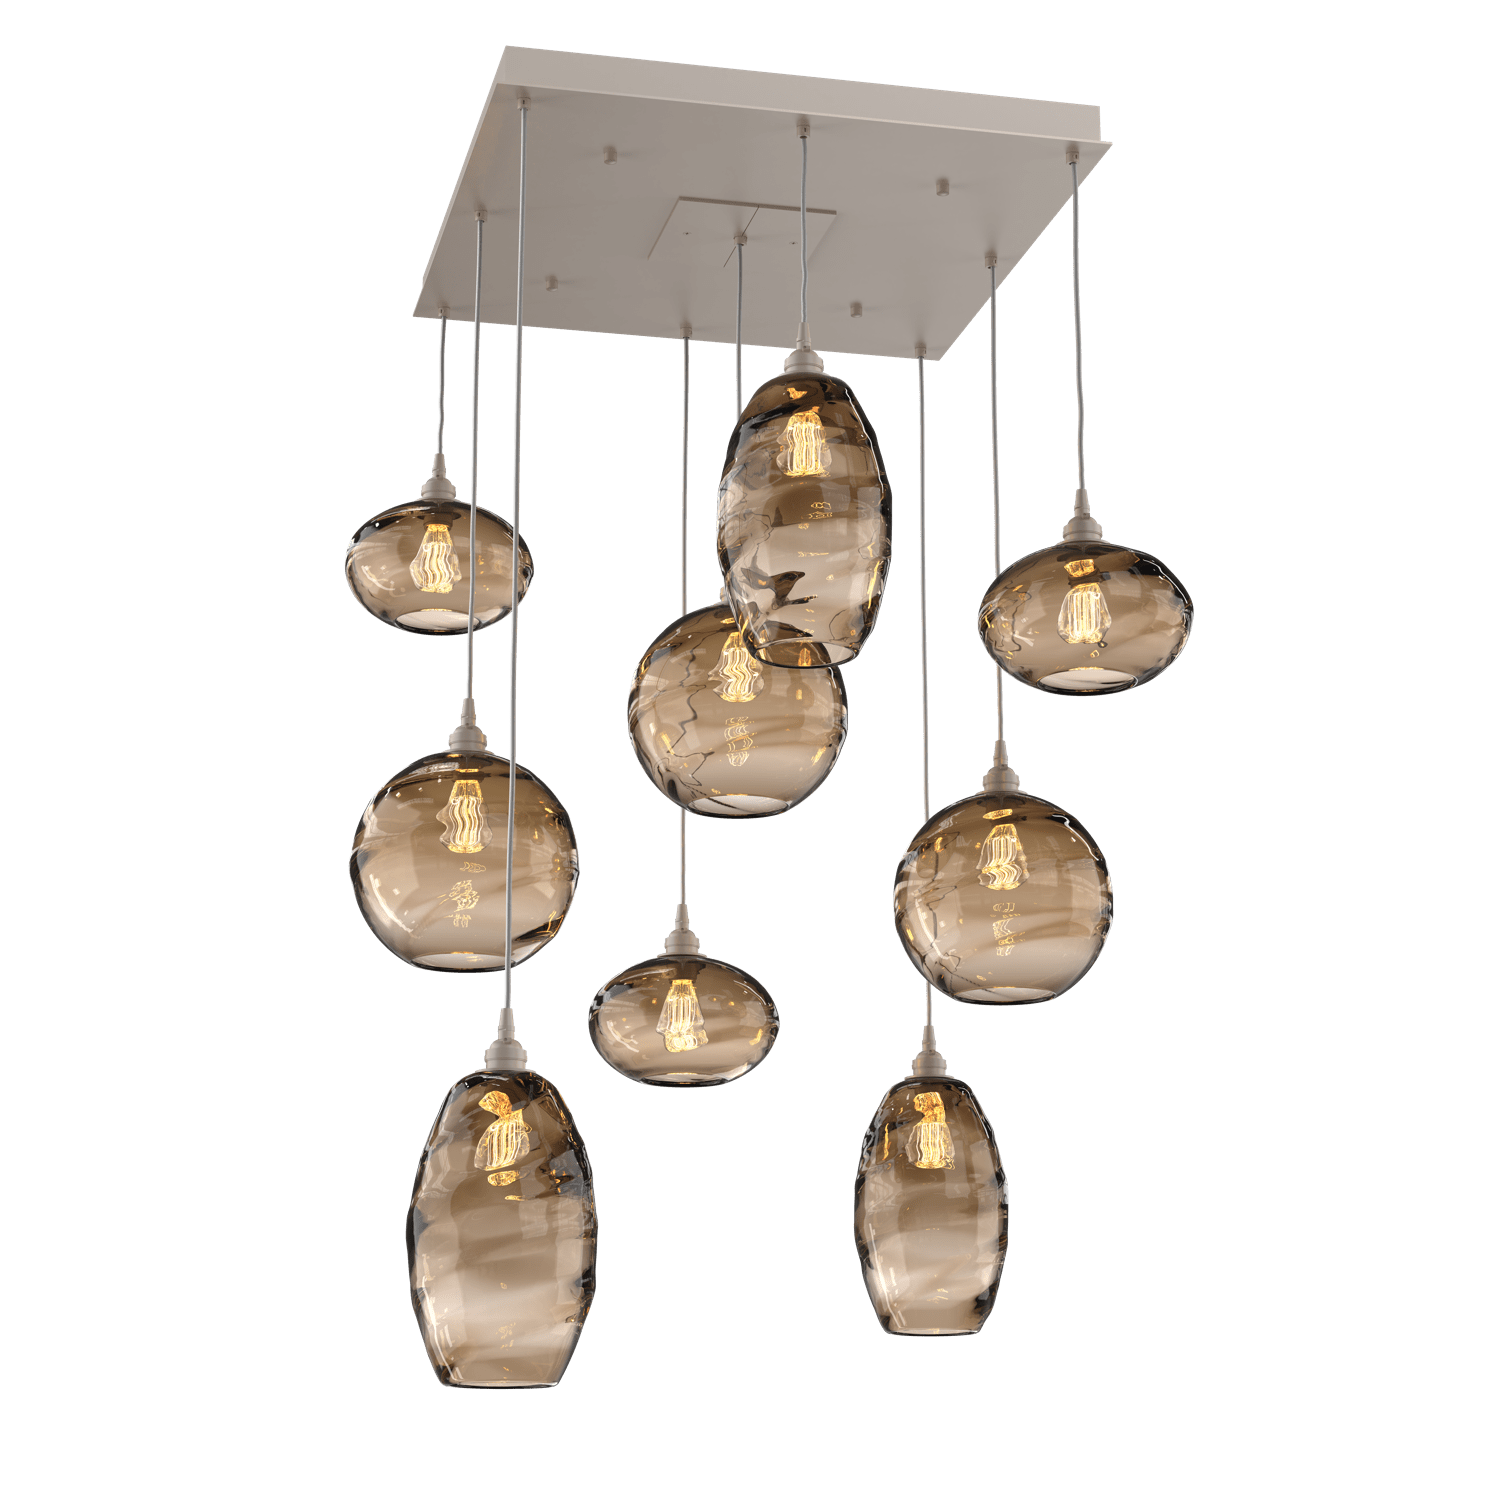 CHB0048-09-BS-OB-Hammerton-Studio-Optic-Blown-Glass-Misto-9-light-square-pendant-chandelier-with-metallic-beige-silver-finish-and-optic-bronze-blown-glass-shades-and-incandescent-lamping